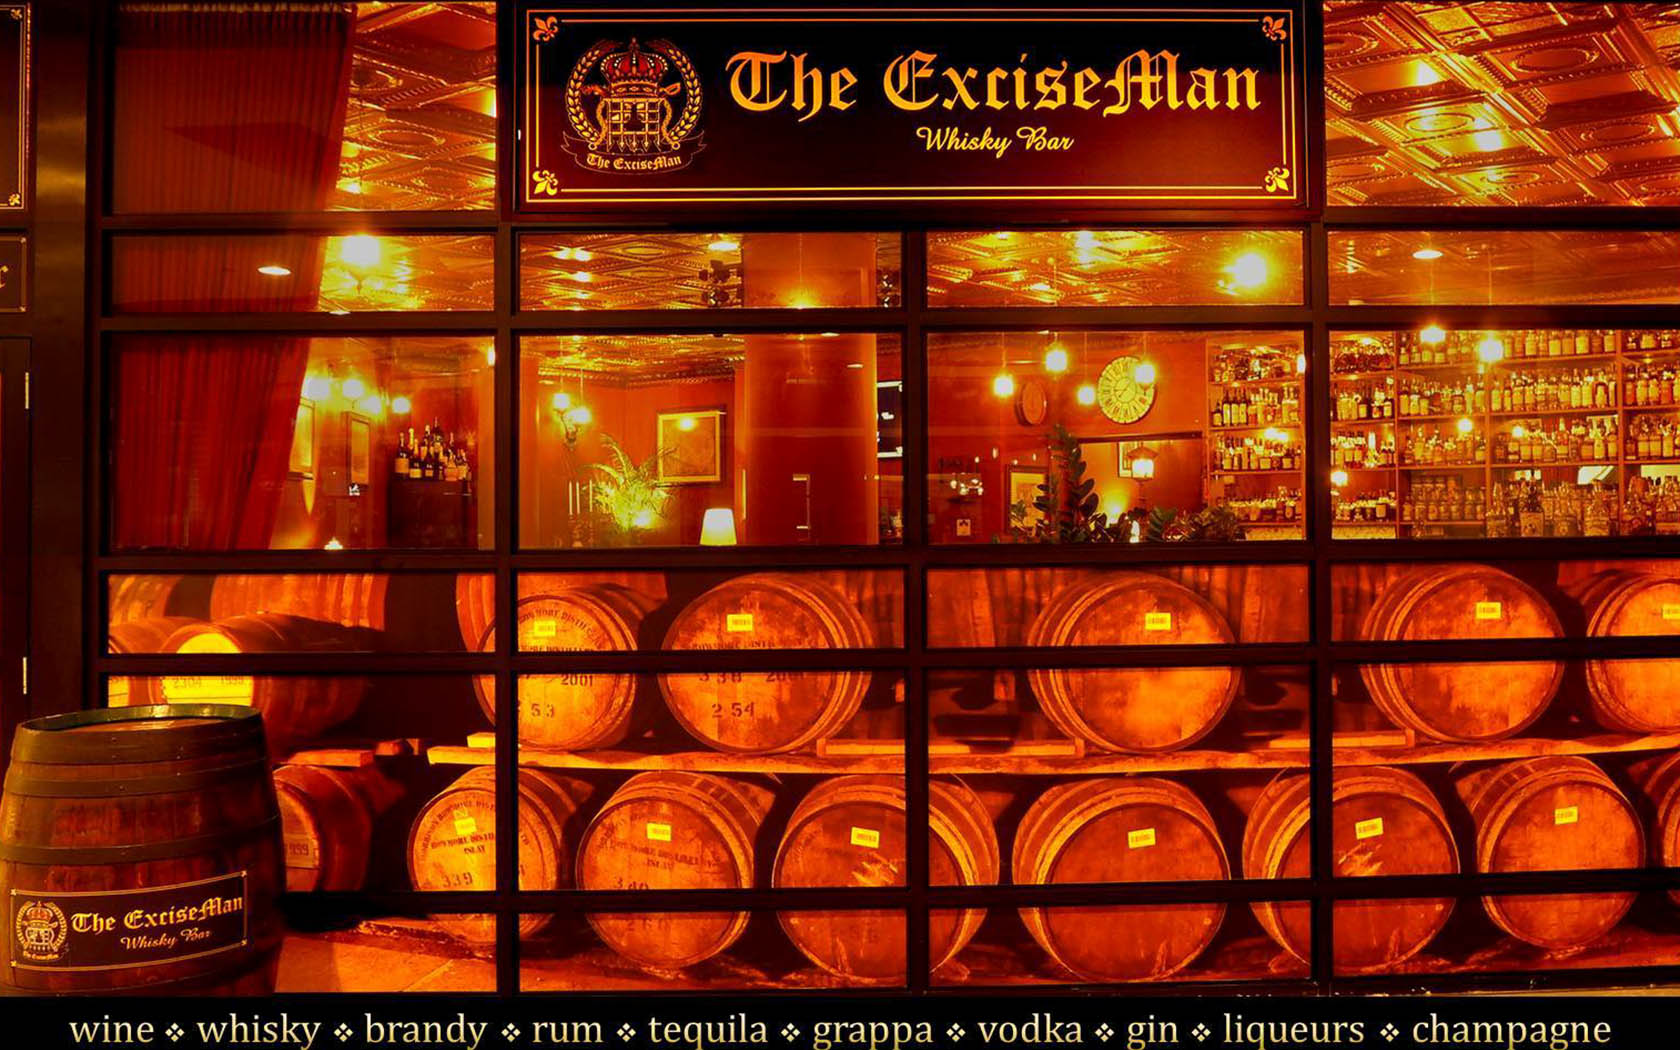 Image of The ExciseMan Wine & Whisky Bar